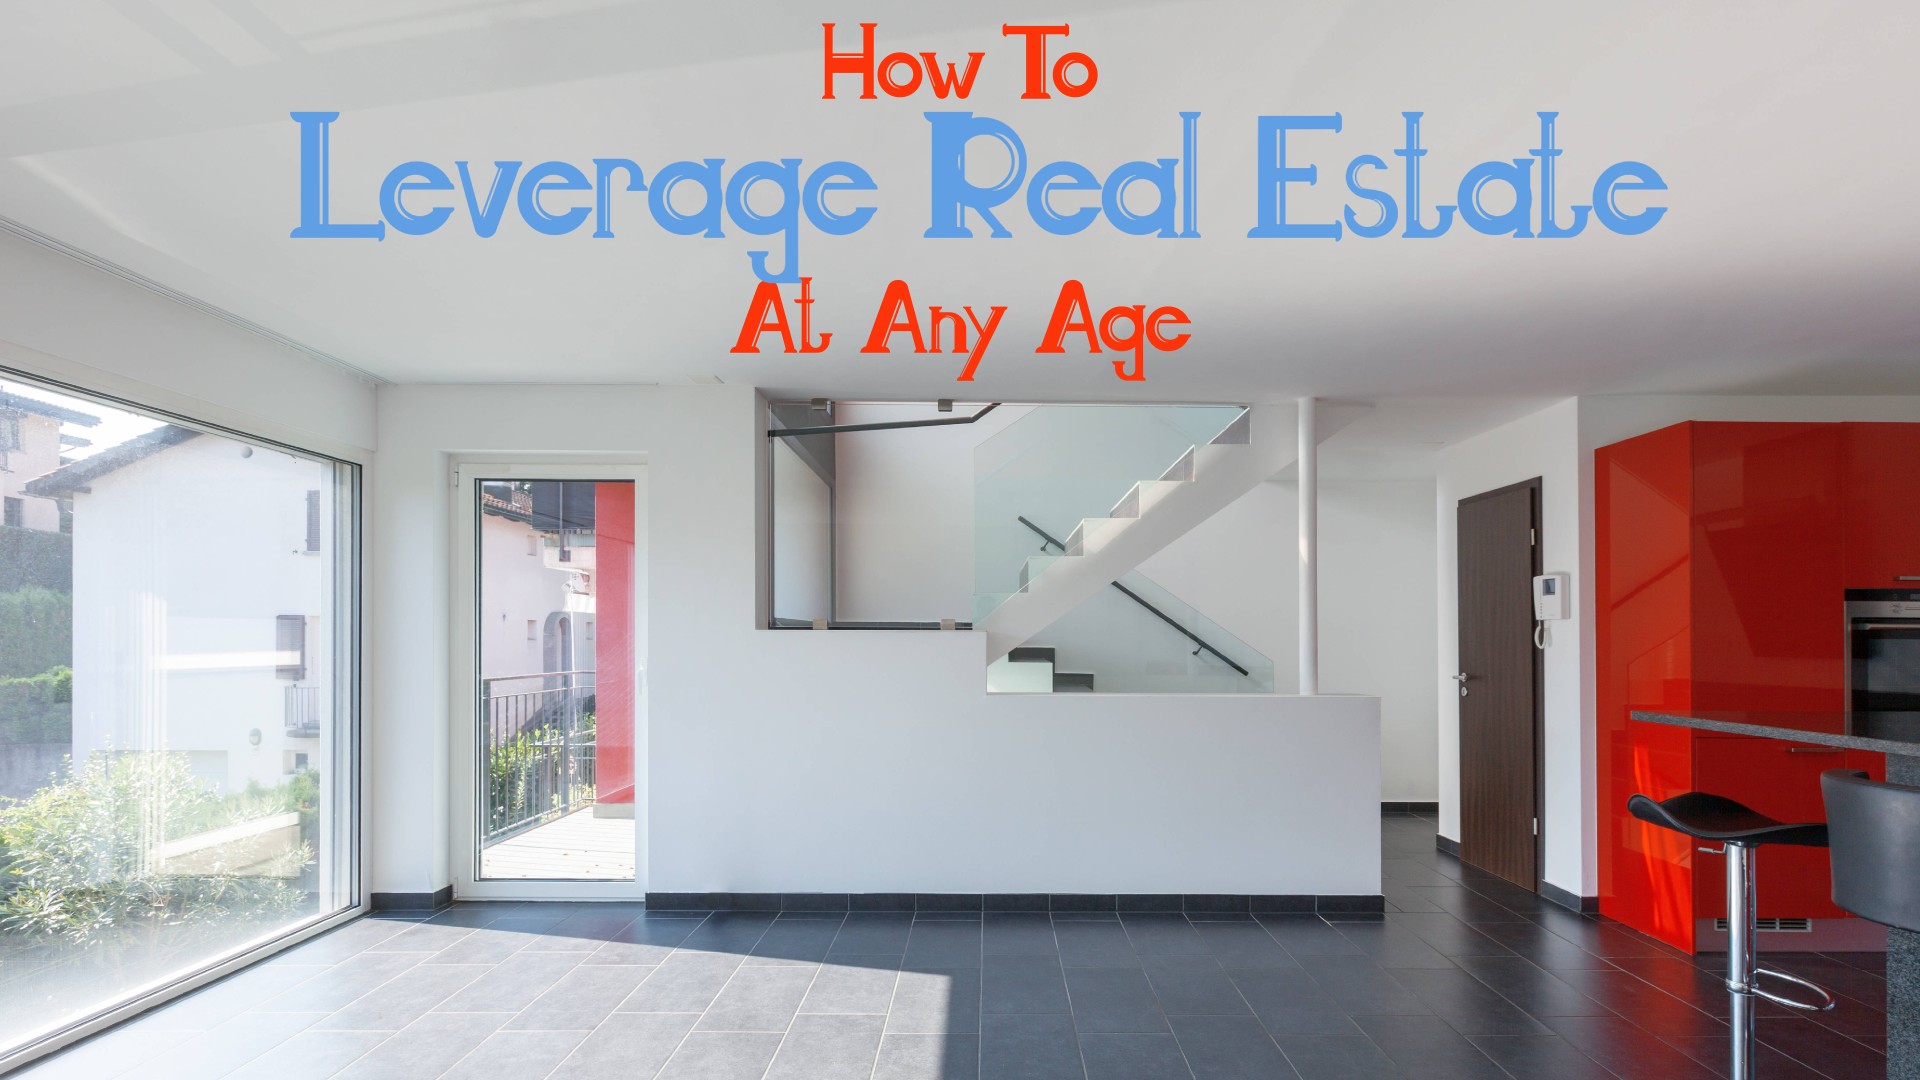 How to Leverage Real Estate at any Age